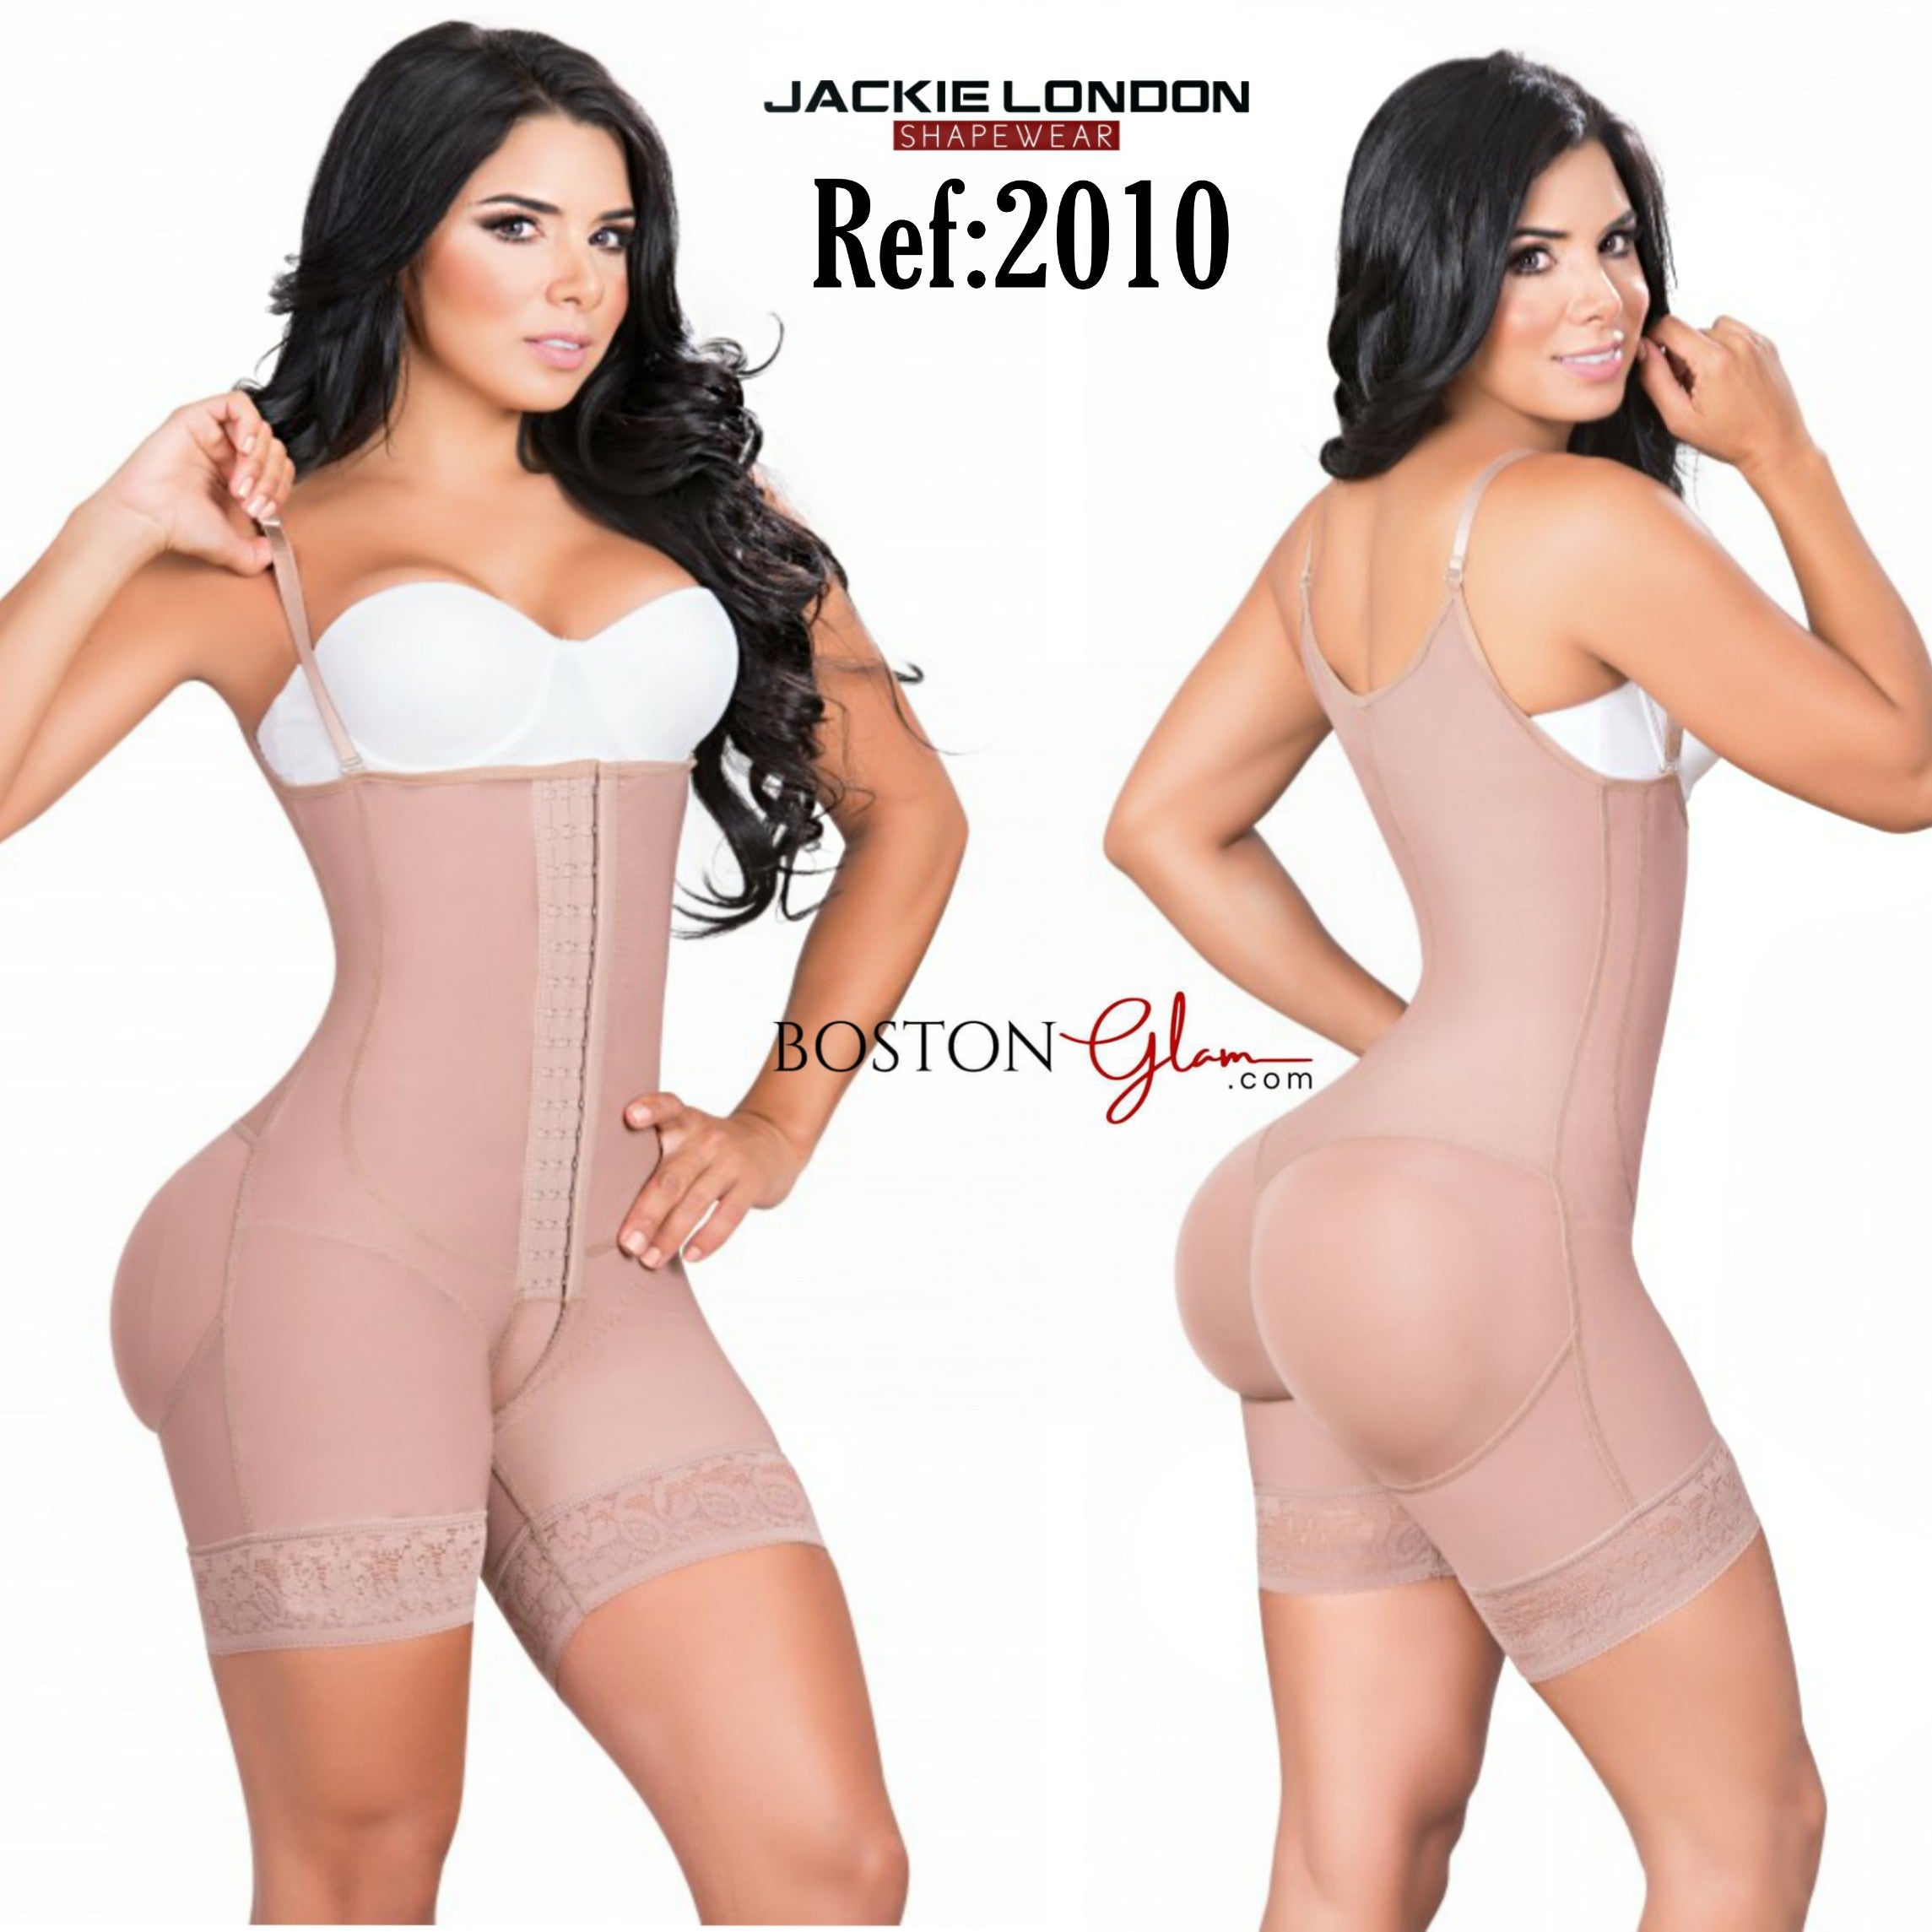 JACKIE LONDON 2011 BLACK - SHORTS BODY SHAPERS WITH COVERED BACK AND P –  BOSTON GLAM